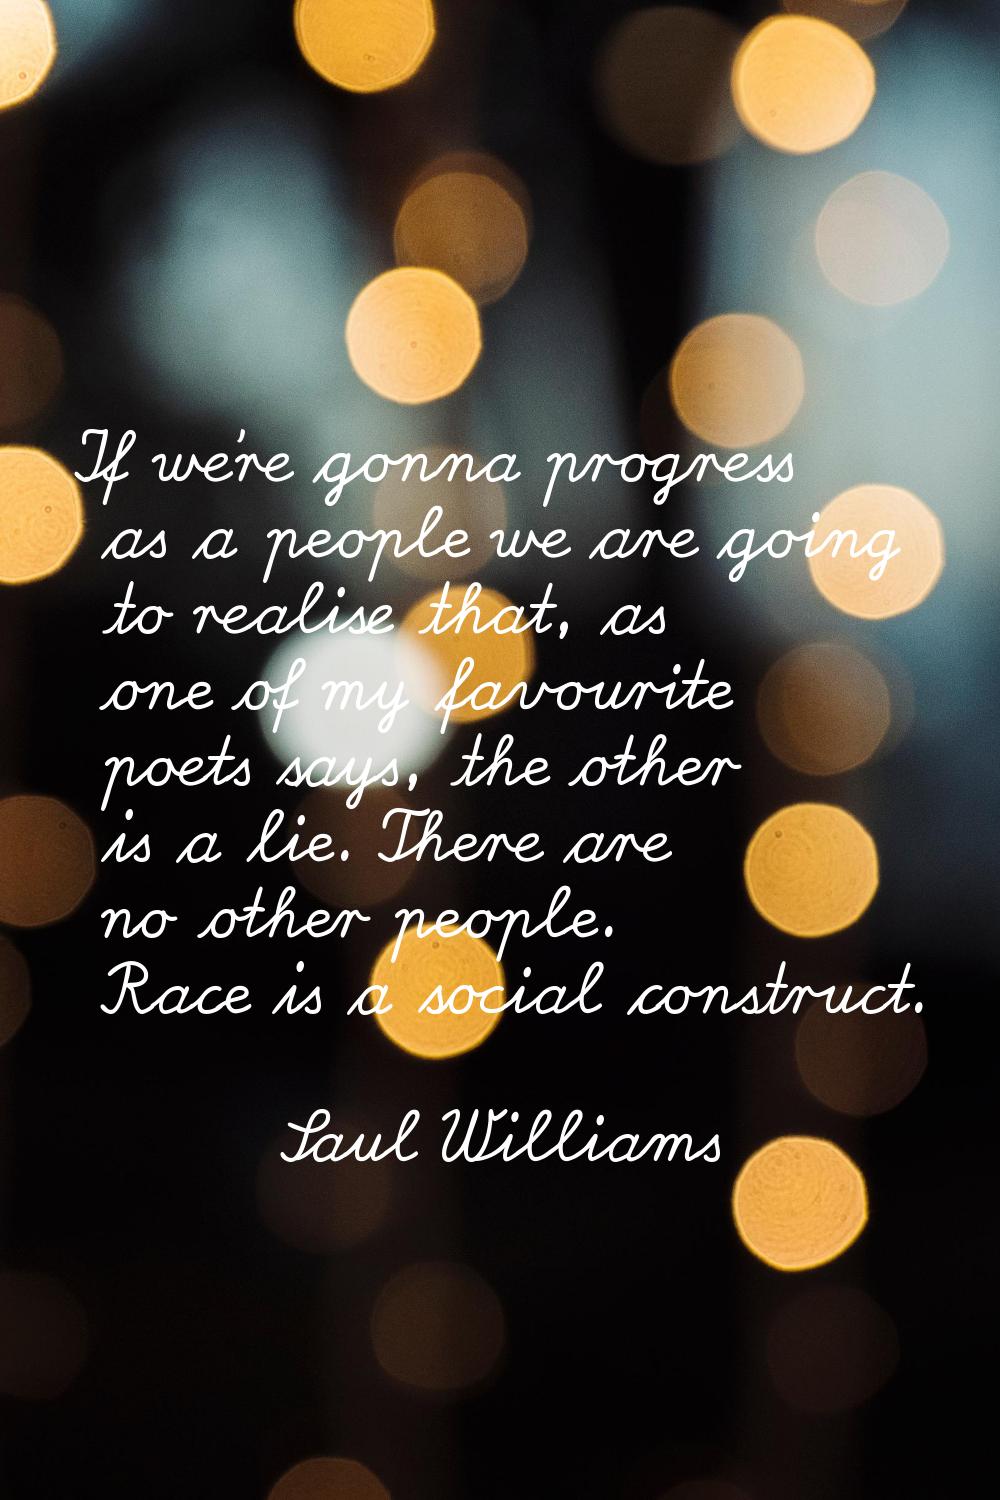 If we're gonna progress as a people we are going to realise that, as one of my favourite poets says